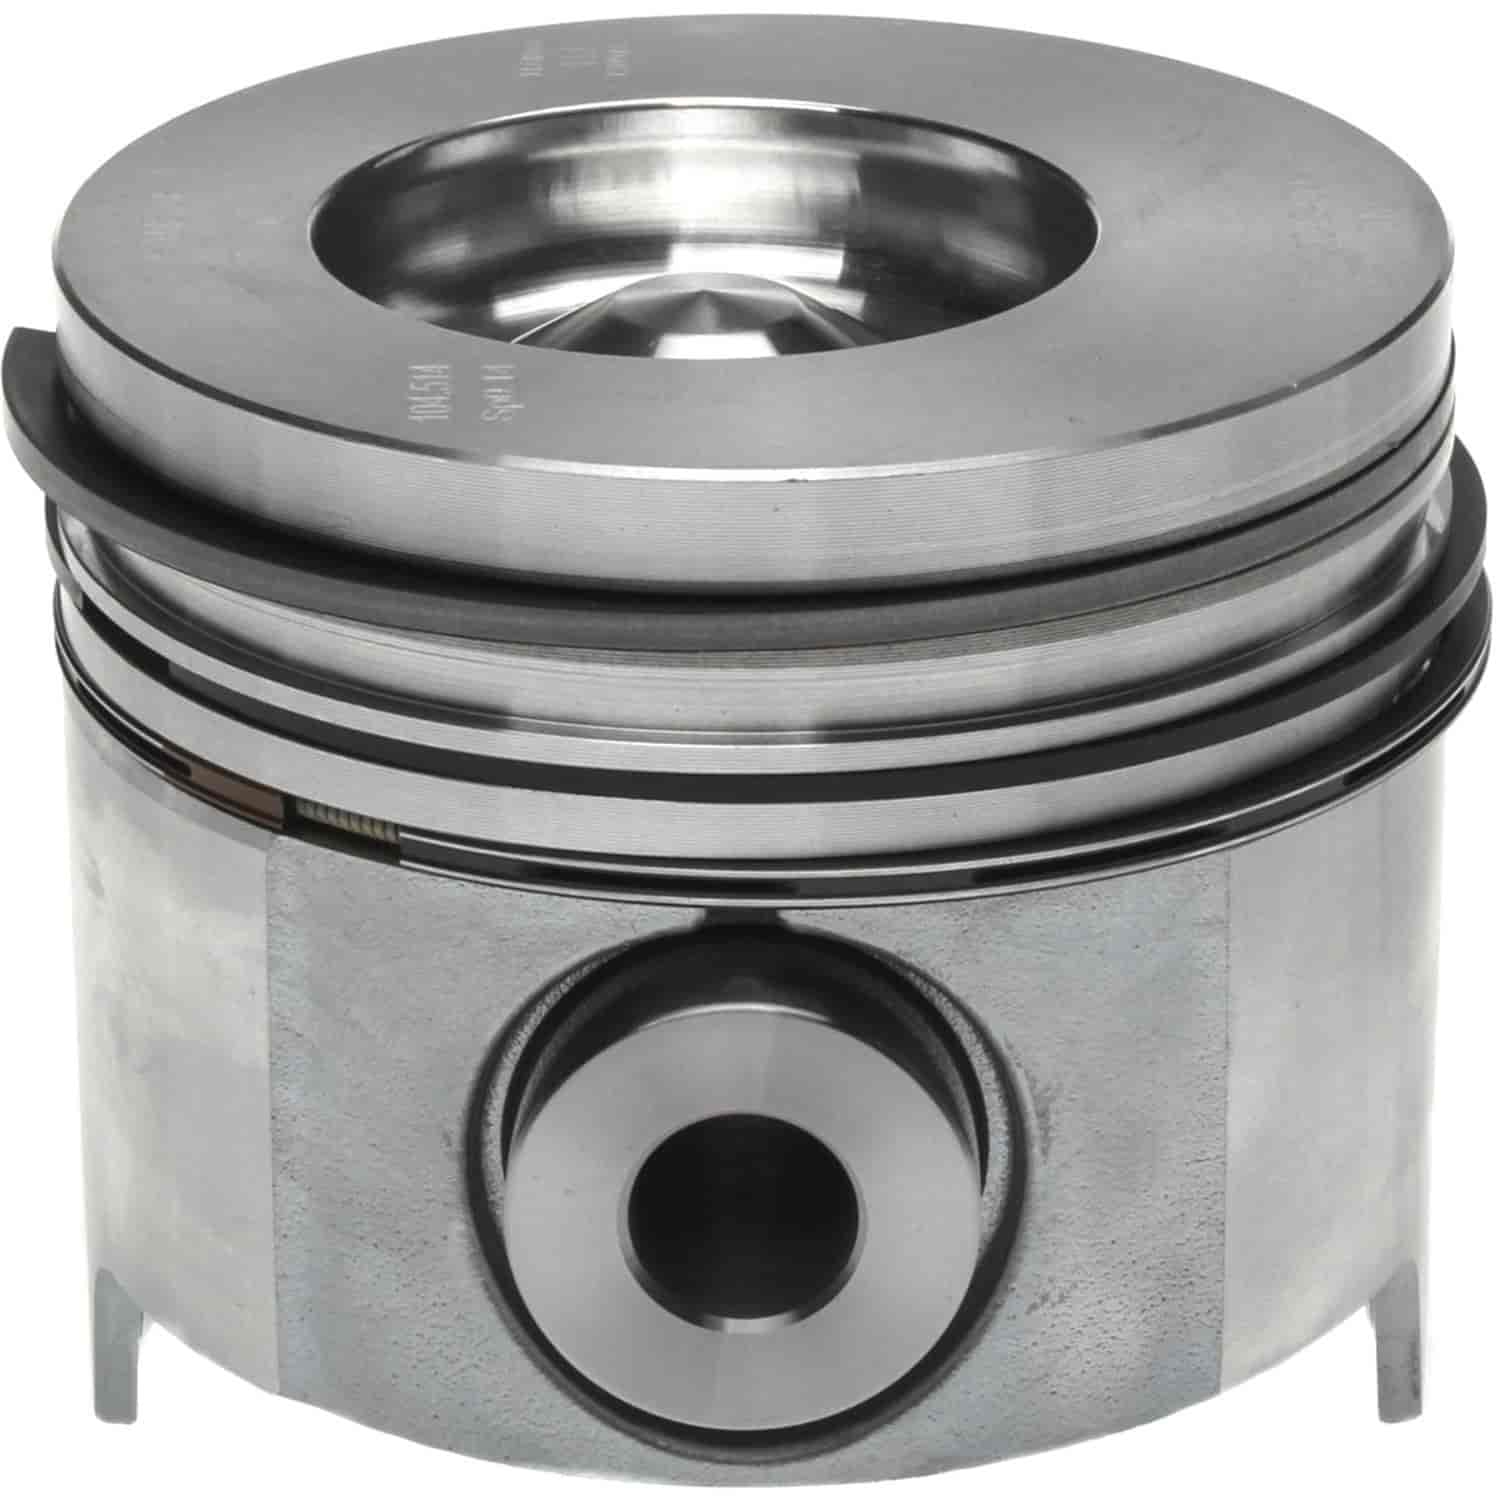 Piston Set With Rings 2001-2005 Chevy/GMC Duramax Diesel V8 6.6L Right Bank with 4.075" Bore (+.020")